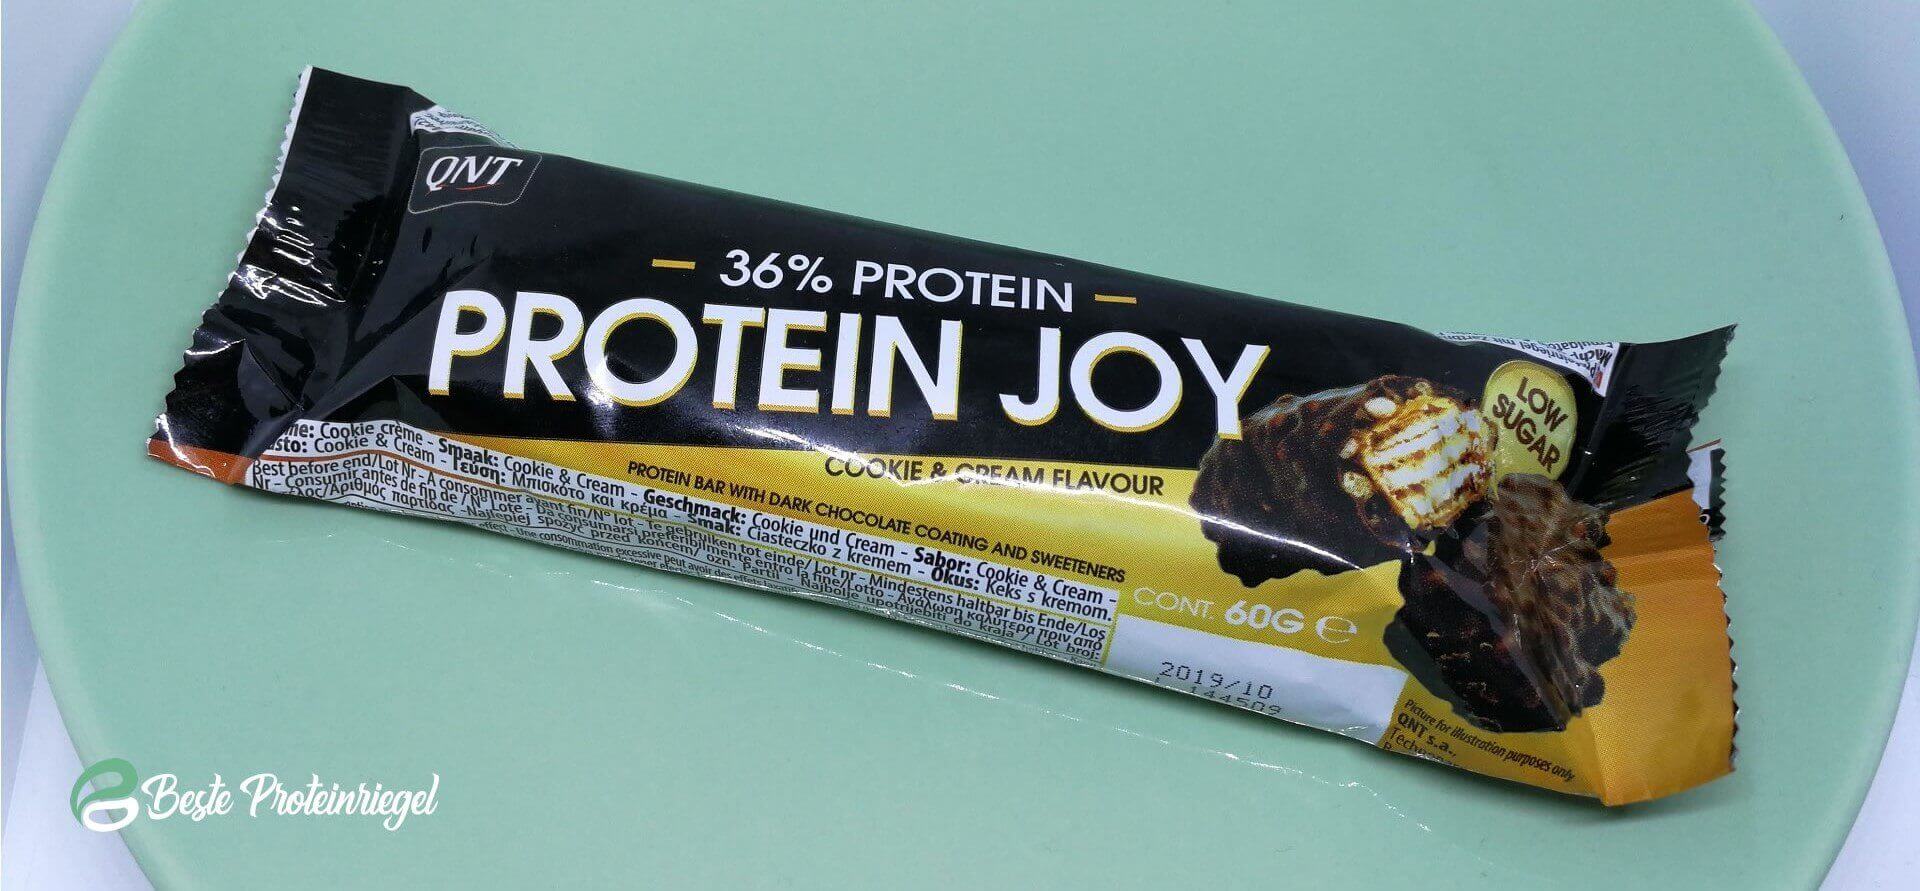 QNT ProteinJoy Verpackung